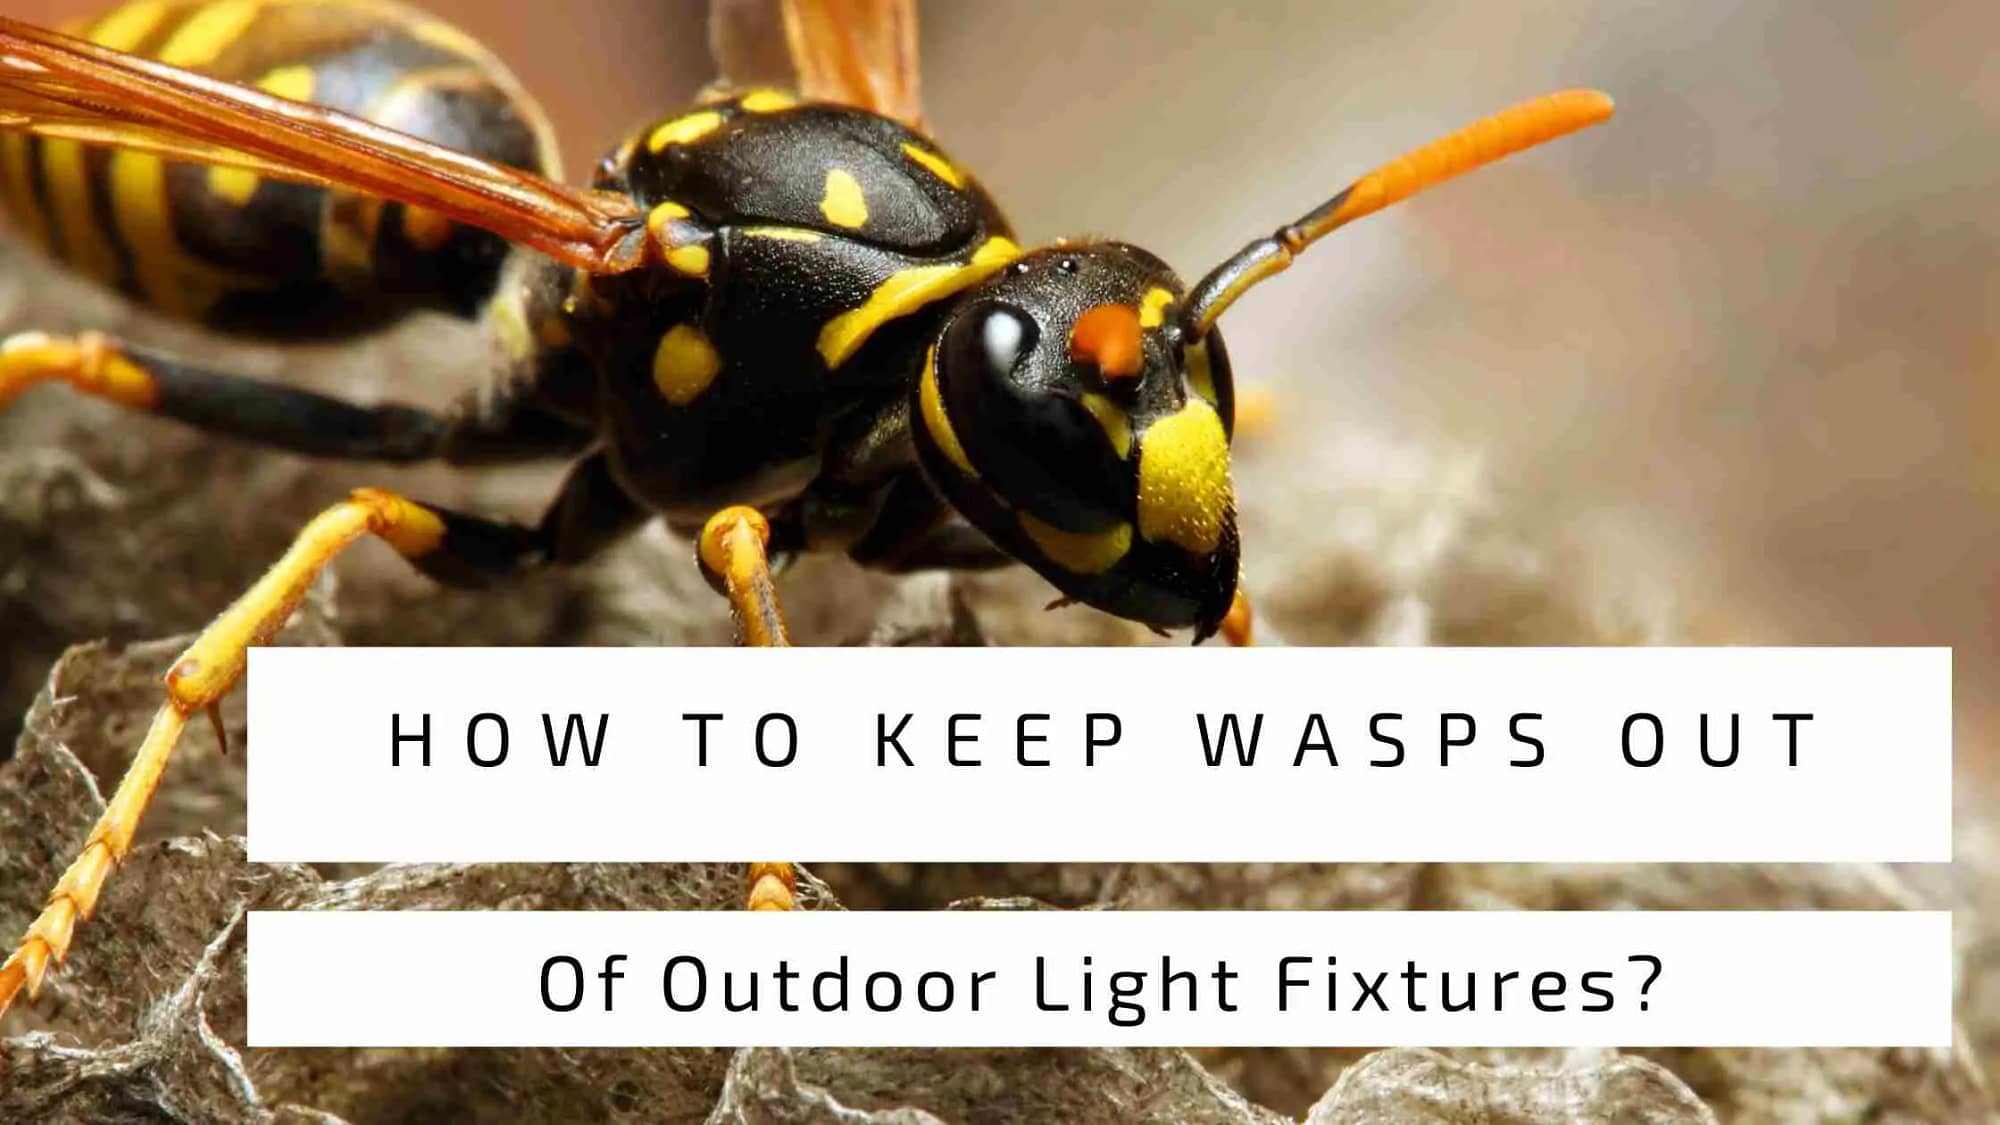 How To Keep Wasps Out Of Outdoor Light Fixtures?